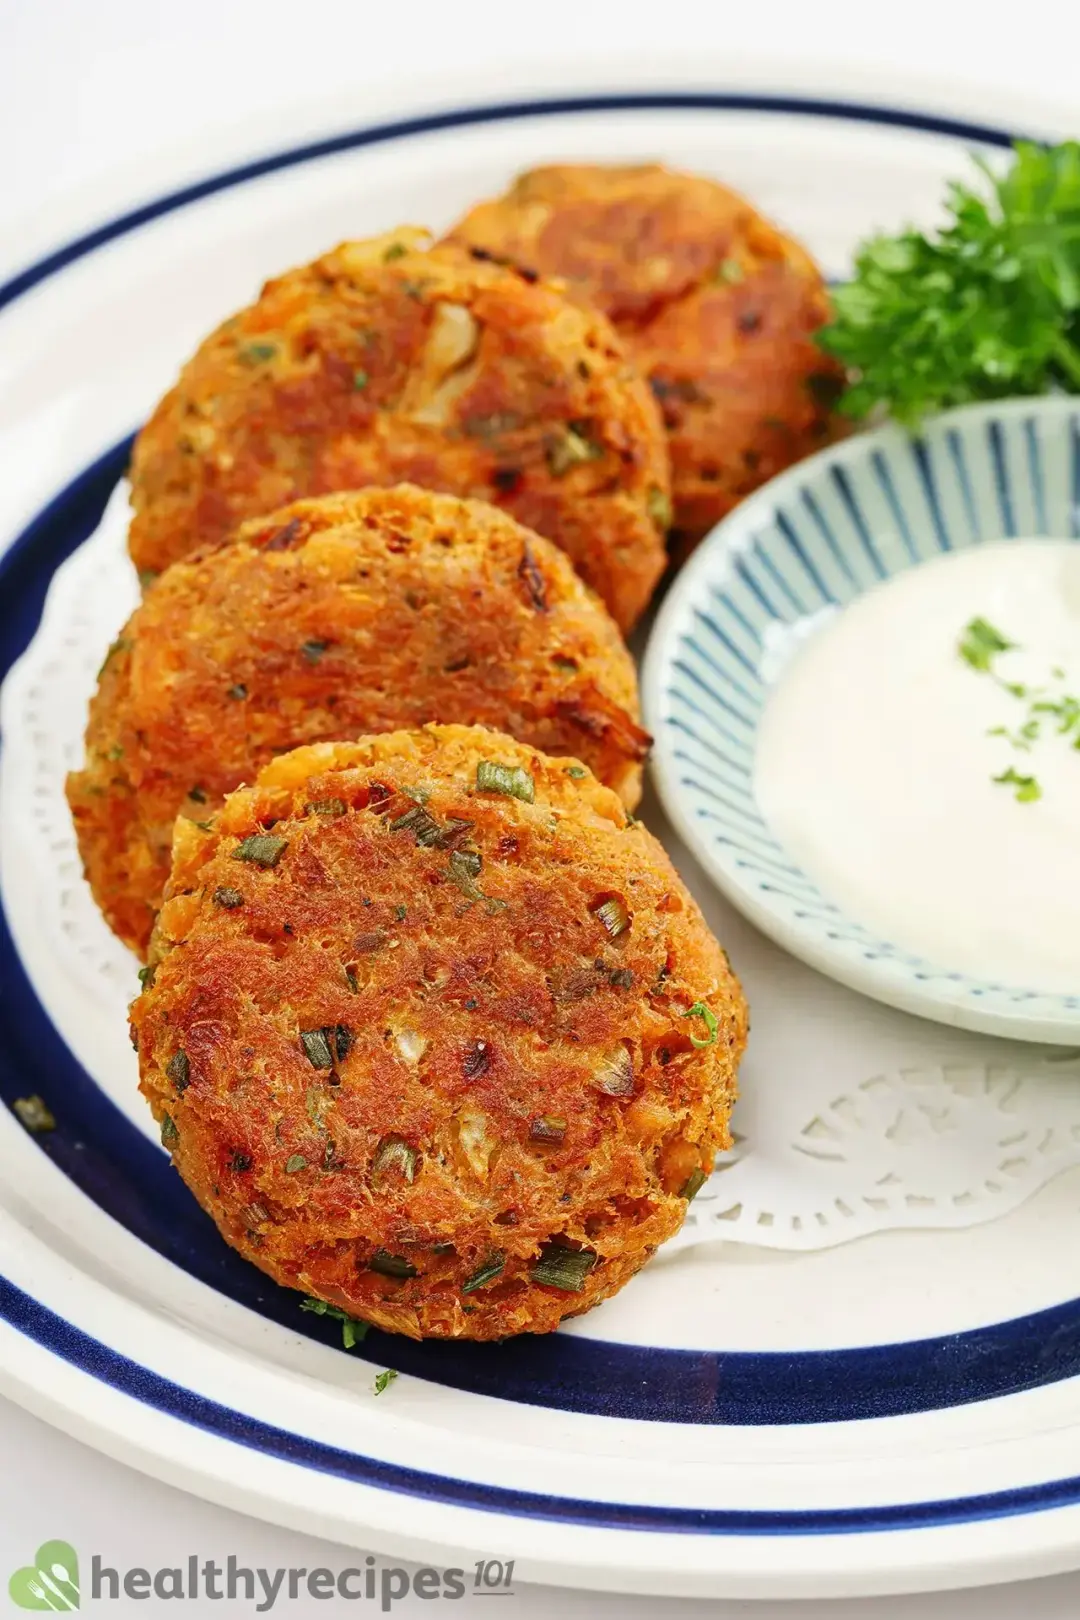 A close up picture of four fried salmon patties on a plate with a small bowl of white sauce and some fresh parsley.